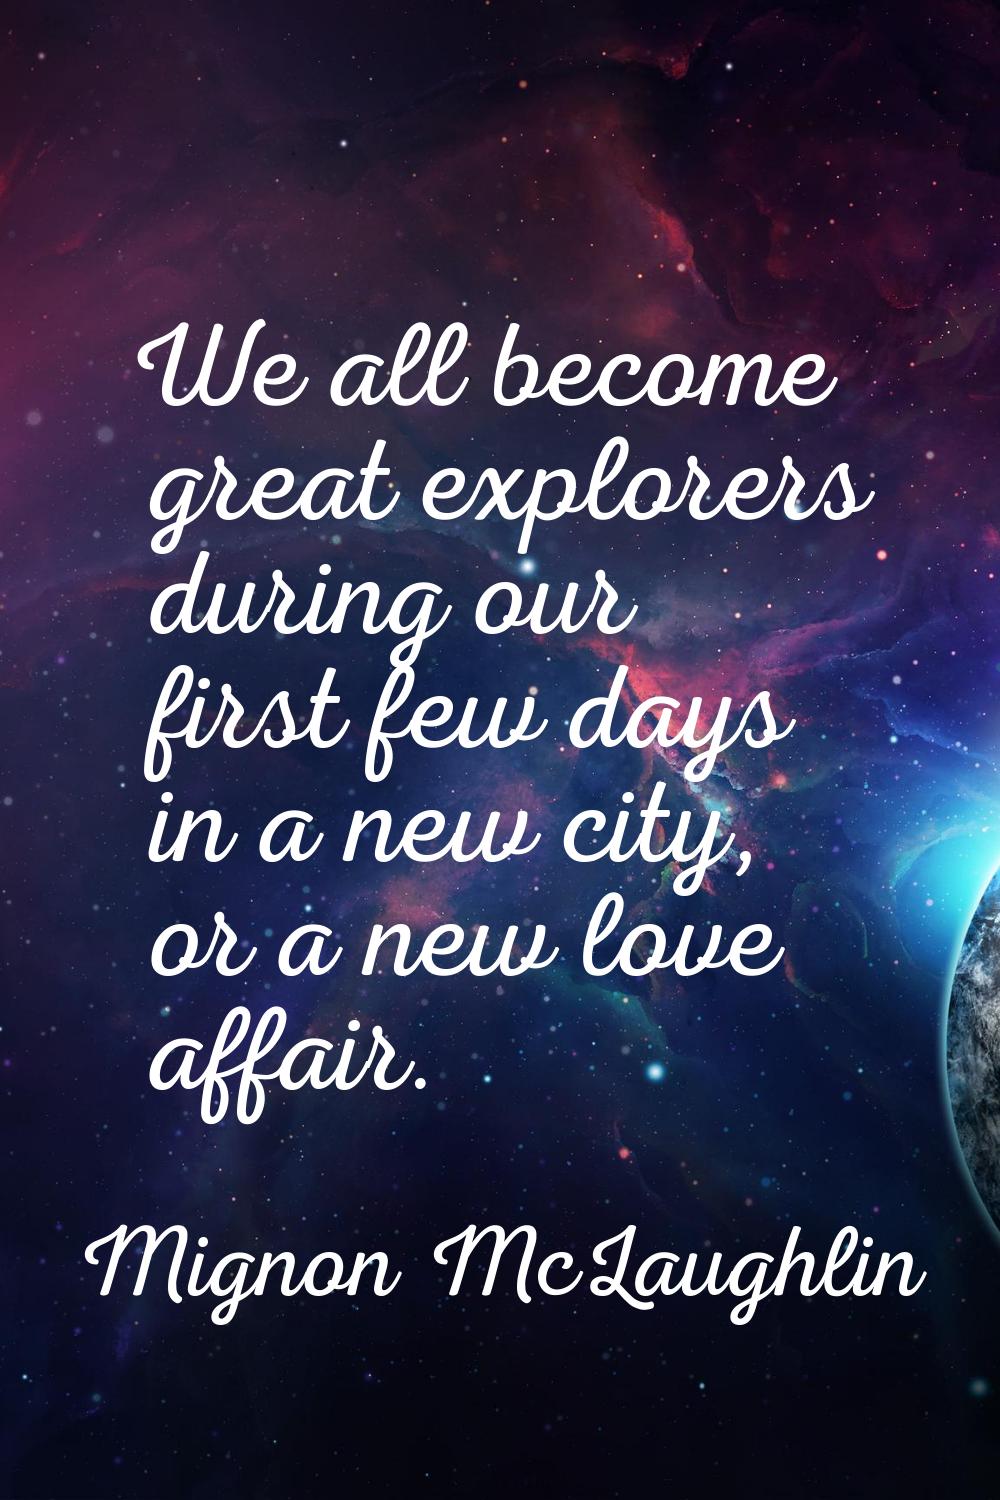 We all become great explorers during our first few days in a new city, or a new love affair.